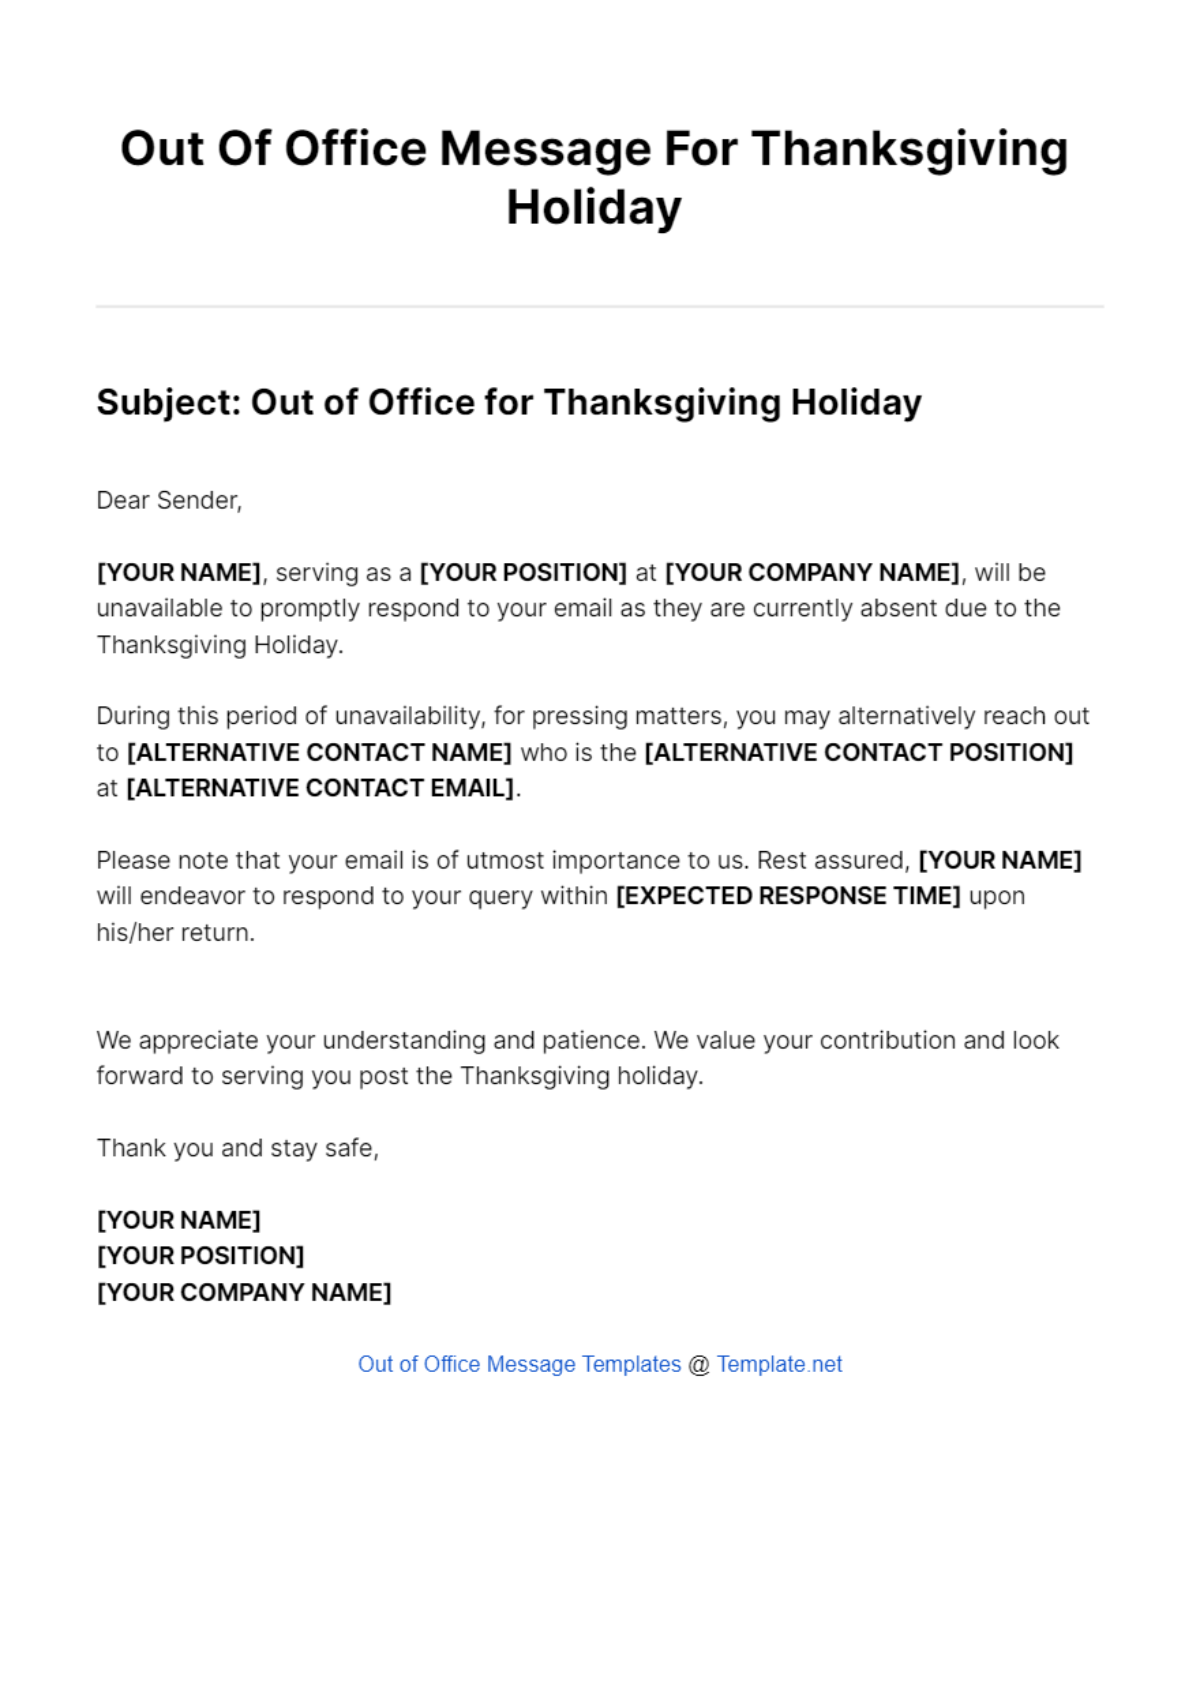 Free Out Of Office Message For Thanksgiving Holiday Template